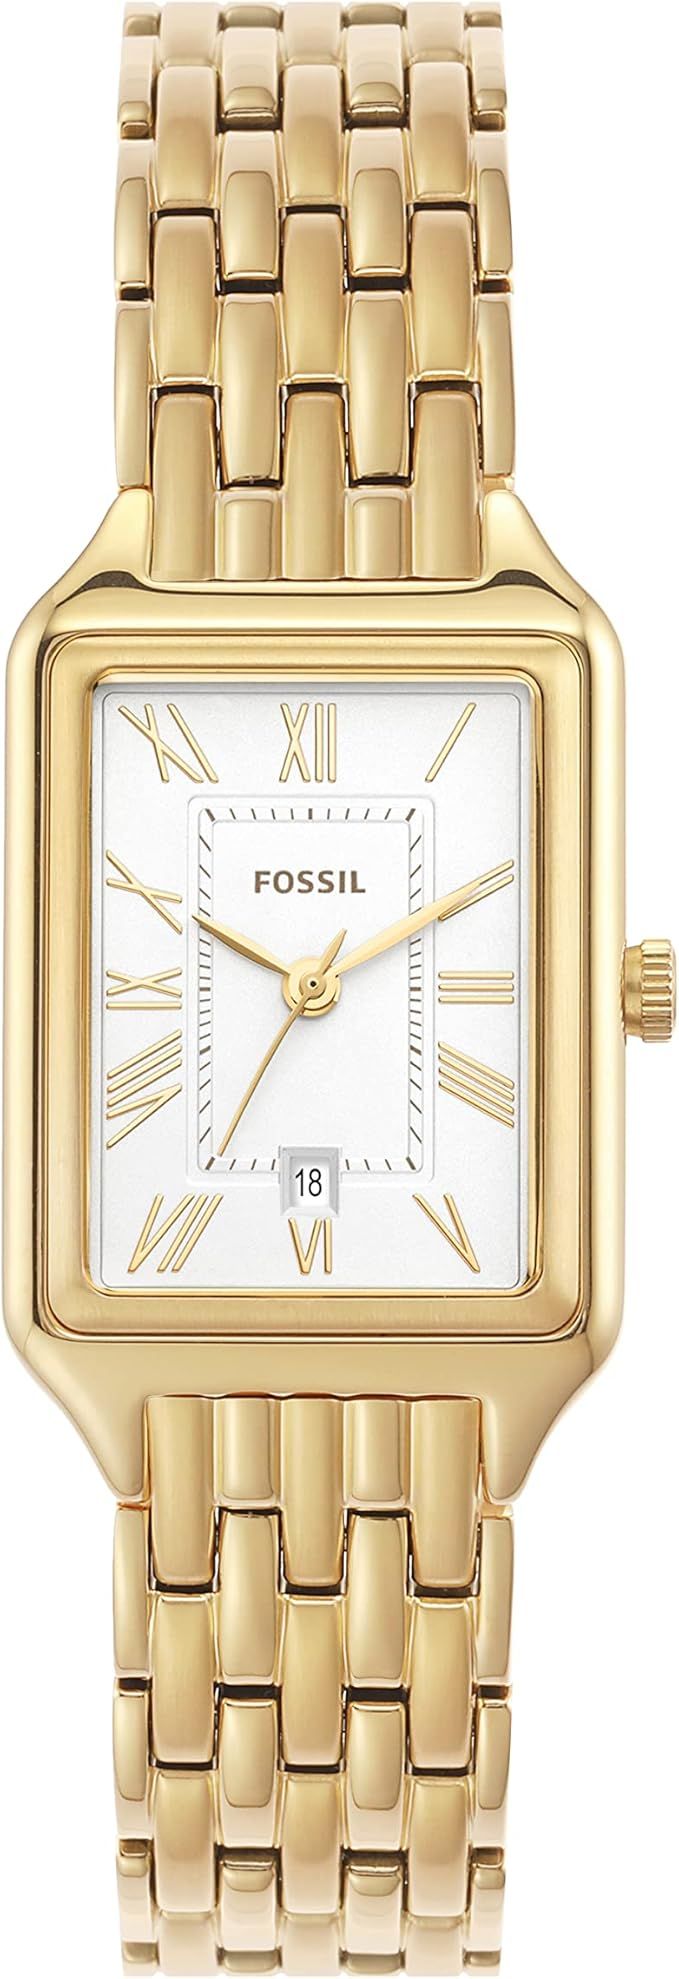 Fossil Women's Racquel Quartz Rectangular Watch with Stainless Steel or Leather Strap | Amazon (US)